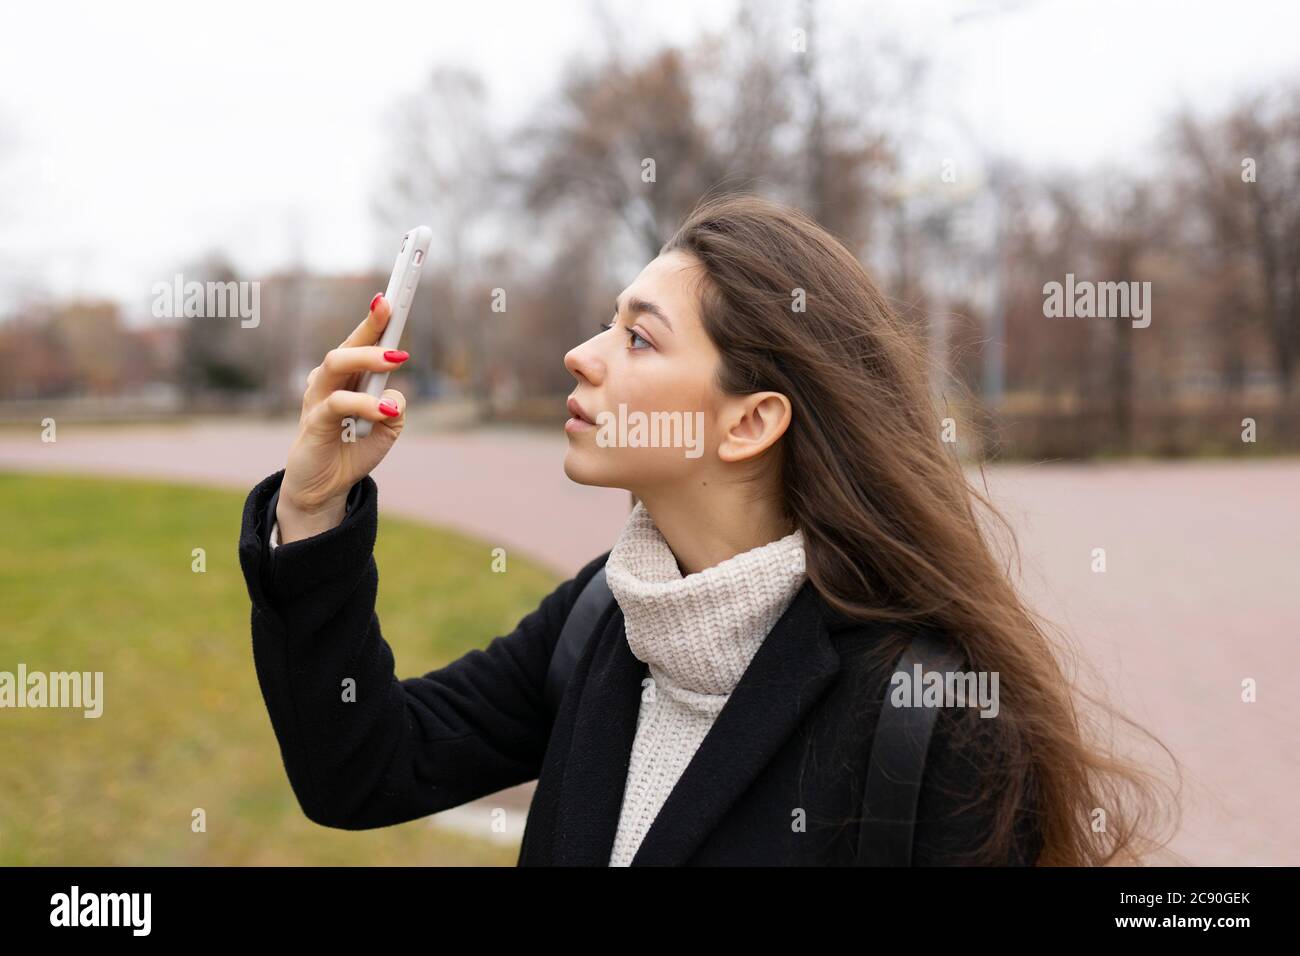 Russia, Chelyabinsk, Young woman looking at smartphone Stock Photo